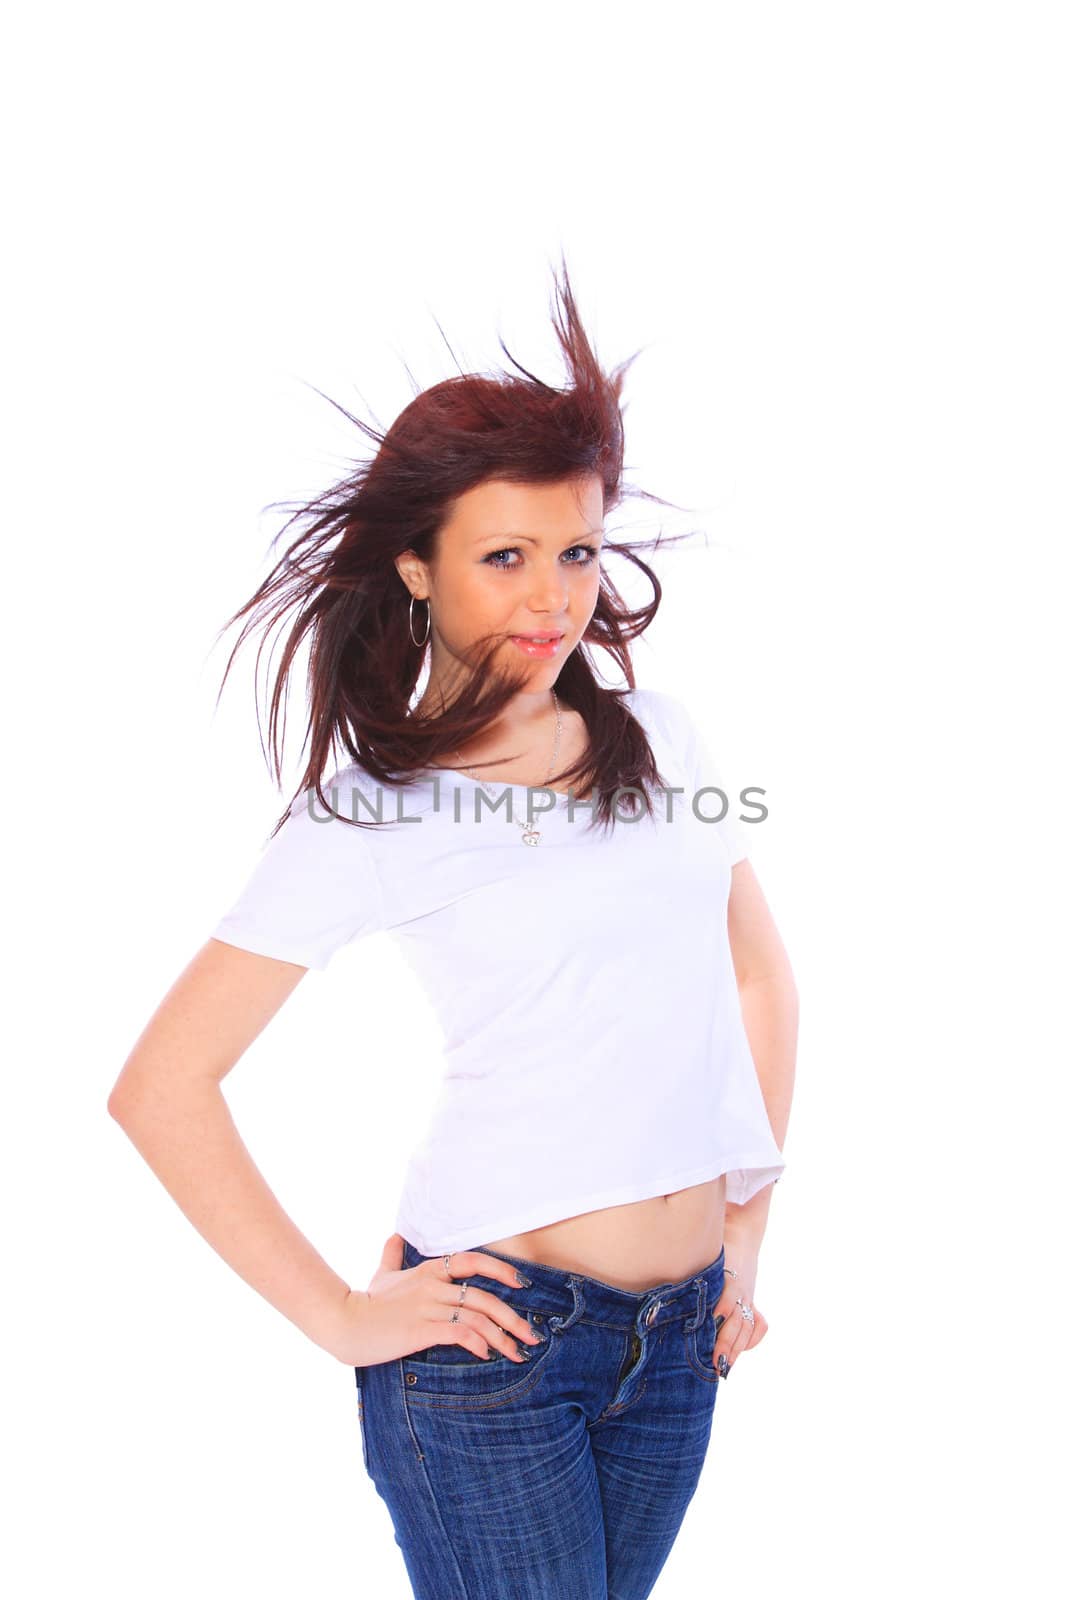 young woman in jeans and t shirt by Netfalls